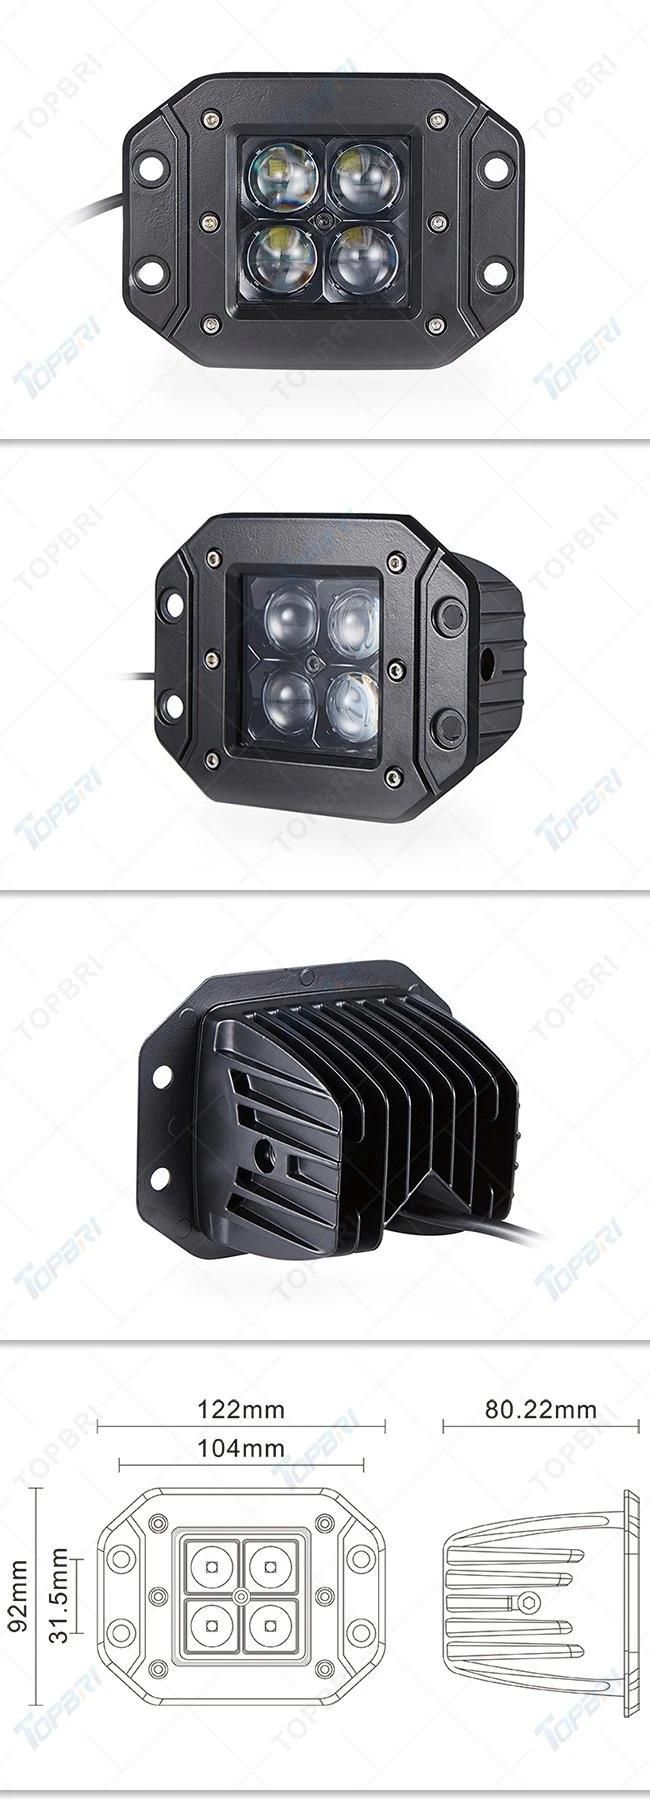 Square CREE 4X4 LED Driving Fog Work Light for Truck Offroad